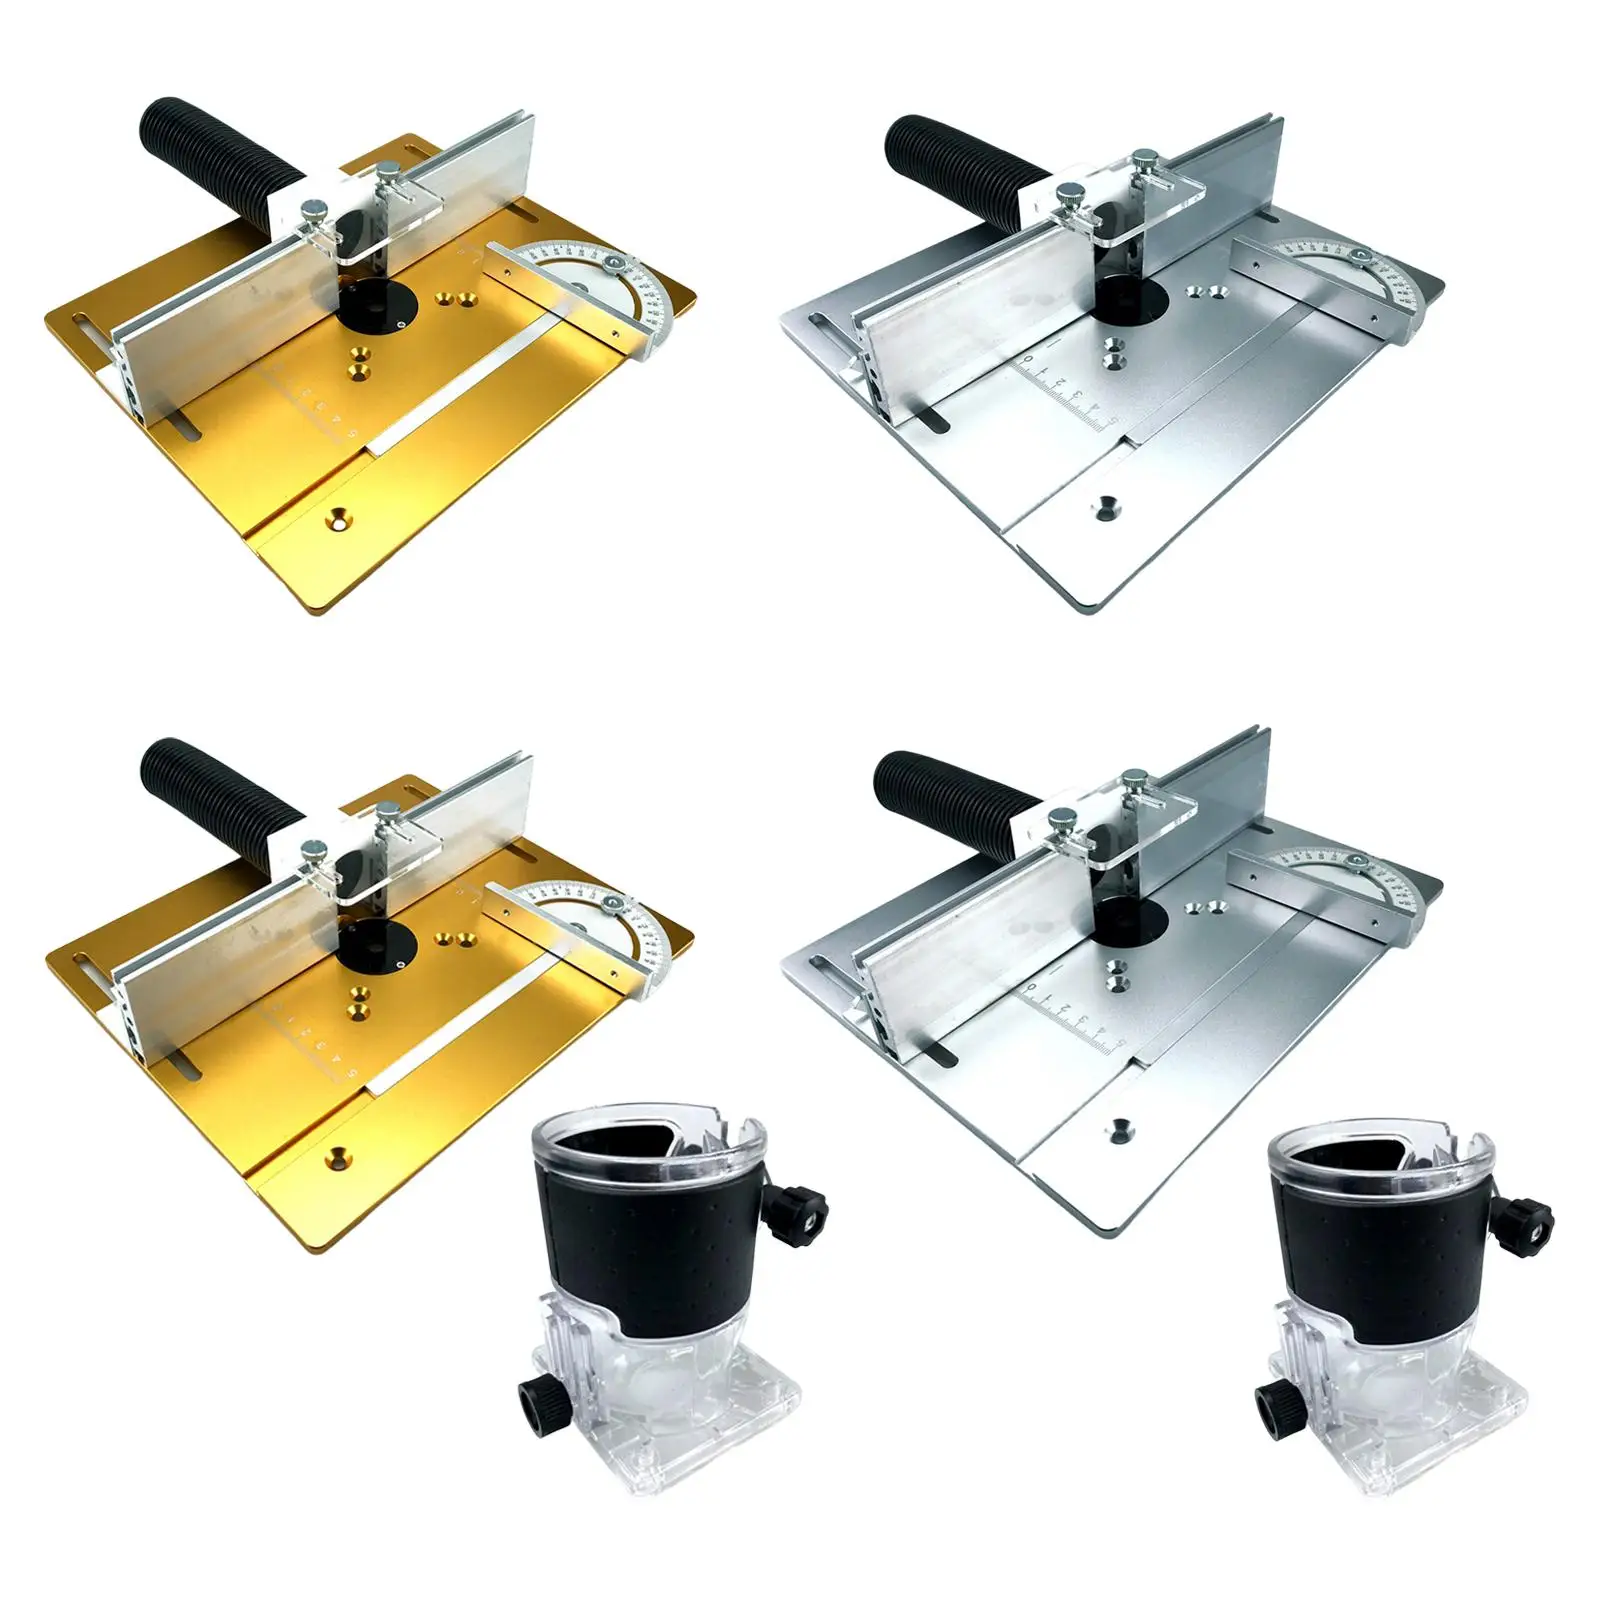 Aluminum Router Insert Plate for Woodworking Benches Sliding Fence Router Table Insert Plate for Trimming Machine Wood Tools